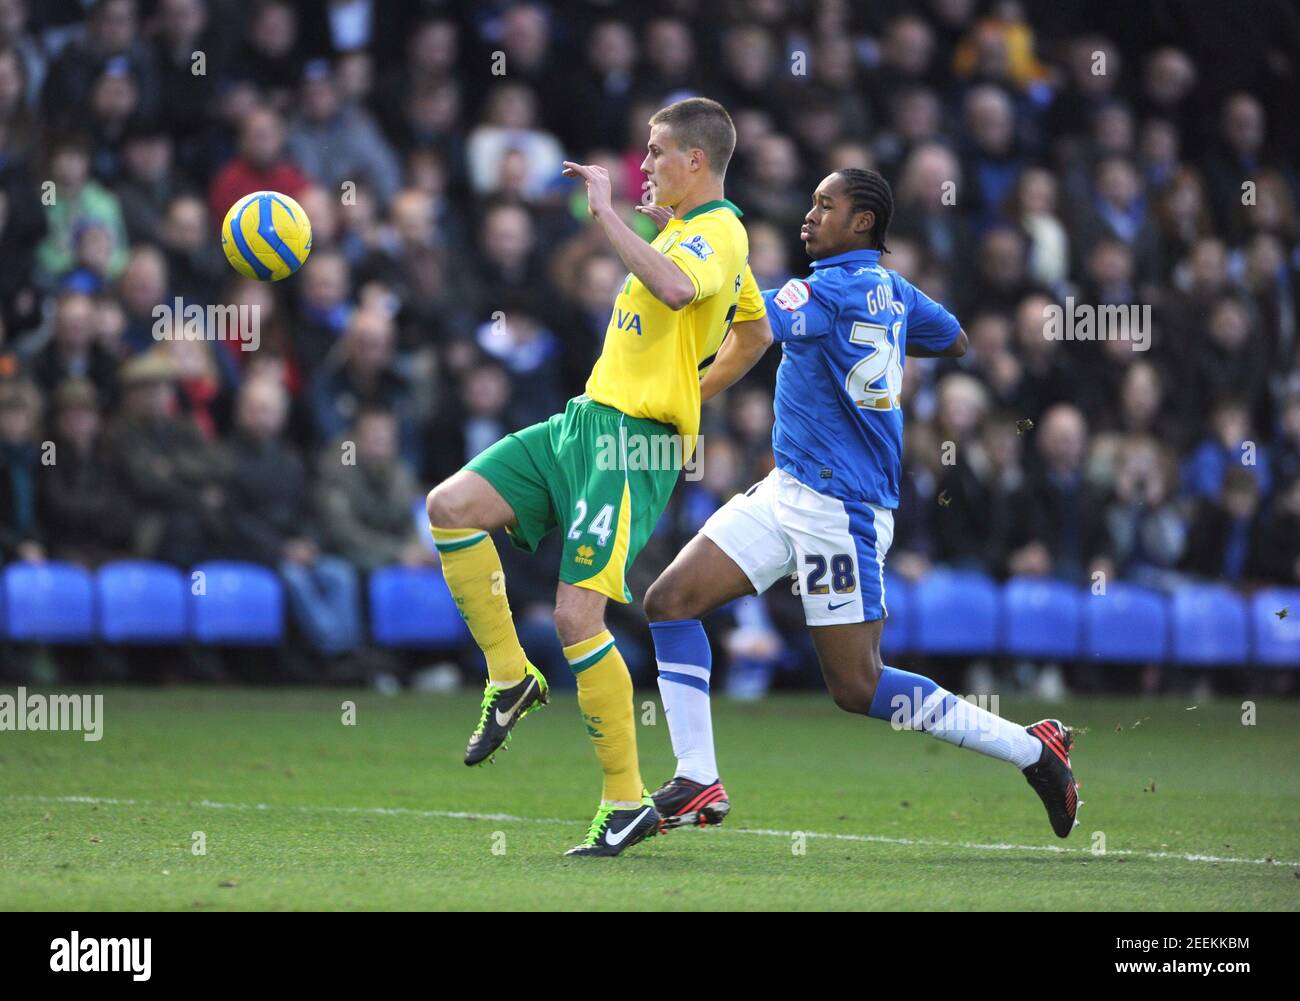 Football - Peterborough United v Norwich City - FA Cup Third Round - London Road - 12/13 - 5/1/13  Norwich City's Ryan Bennett in action against Peterborough United's Jaanai Gordon Hutton   Mandatory Credit: Action Images / Tony O'Brien Stock Photo